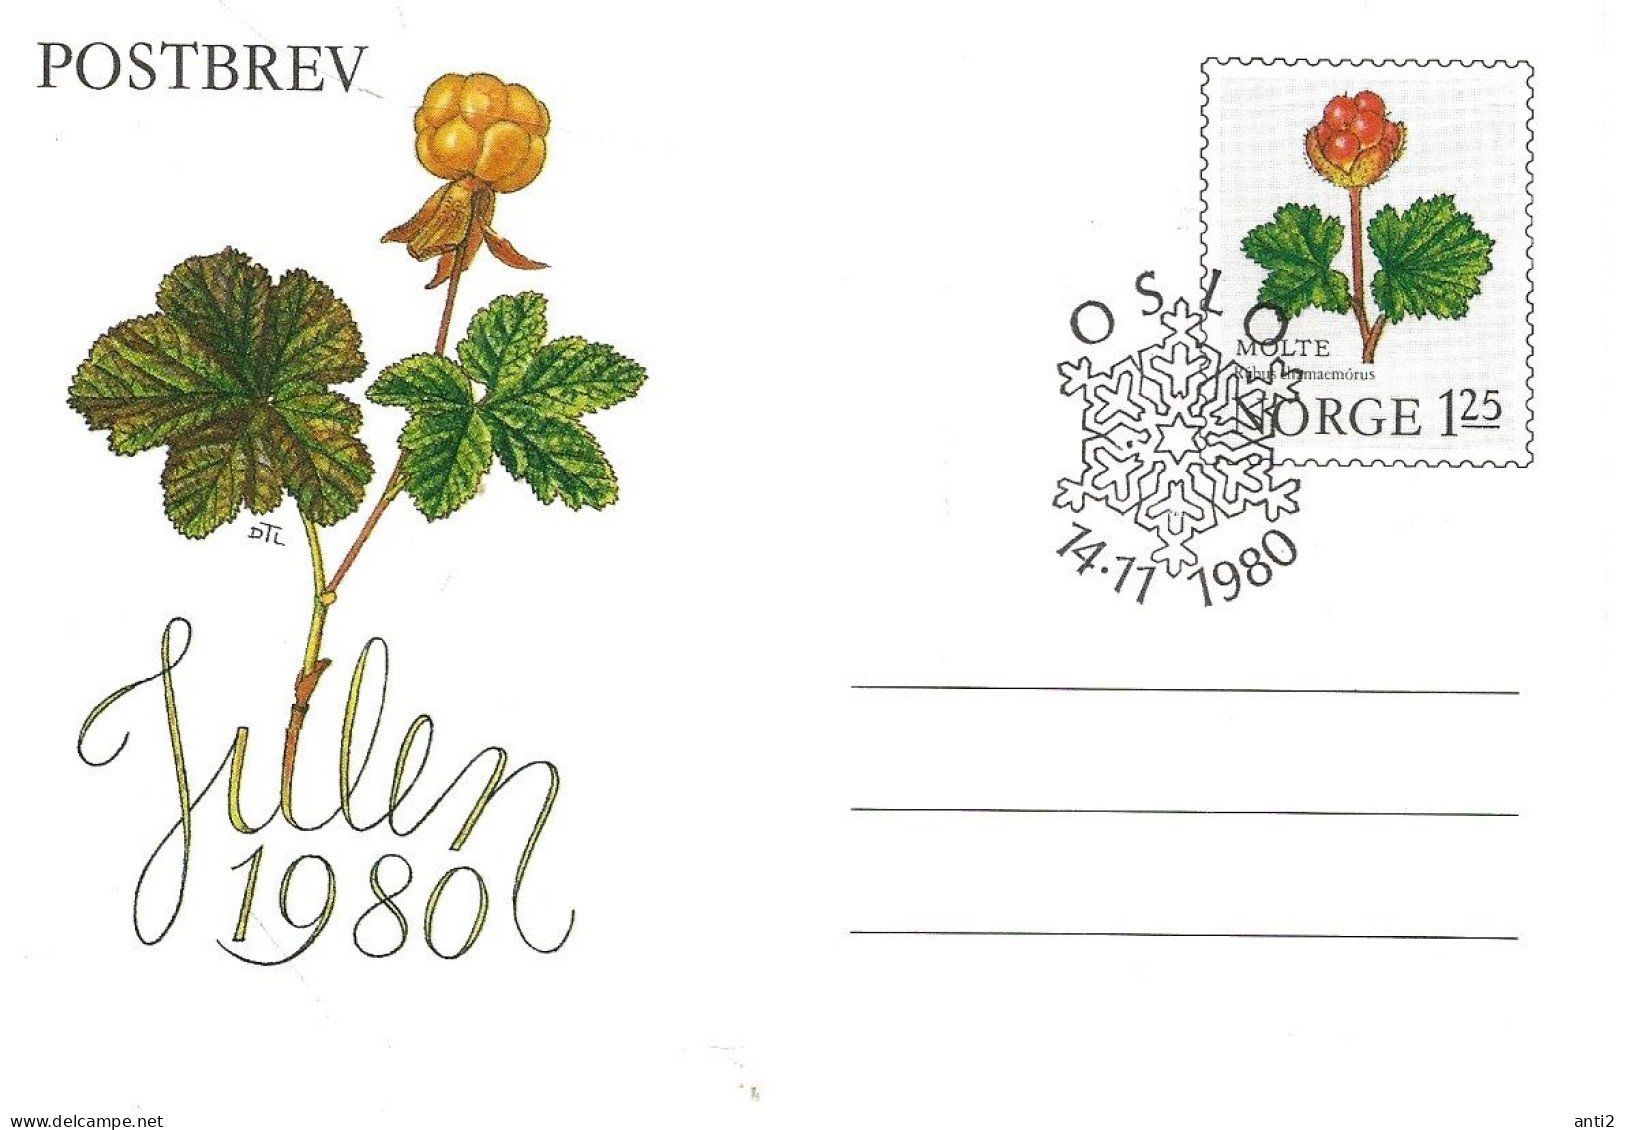 Norge Norway 1980 Stationary - Postbrev, Letter With Imprinted Stamp Special For Christmas 1980 With Ripe Berries   FDC - Covers & Documents